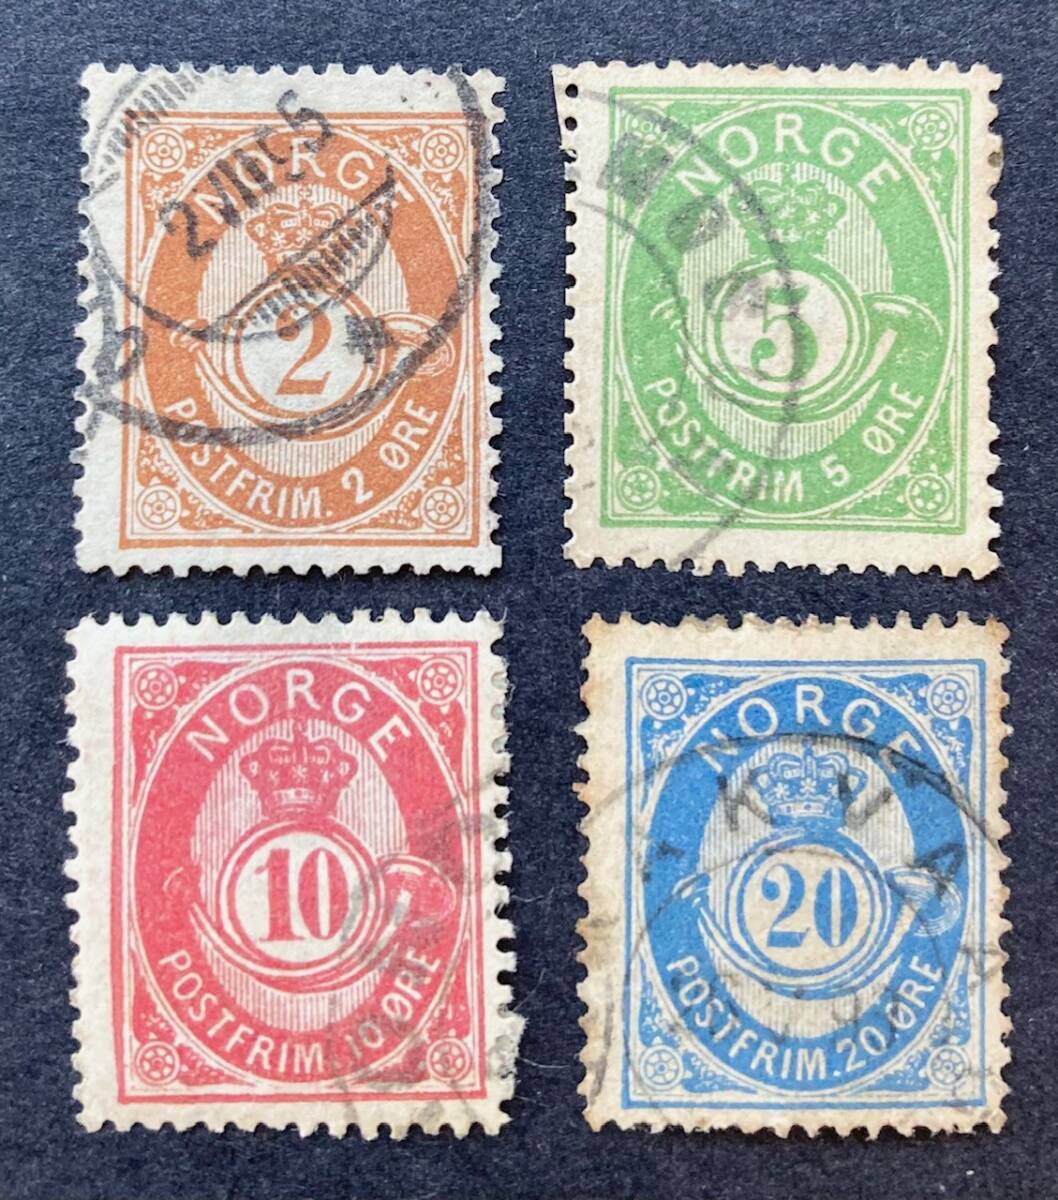 [noru way ]1877-90 year issue : ordinary stamp ( country name selif less +o Skull 2.. image )11 kind used superior article ~ beautiful goods 